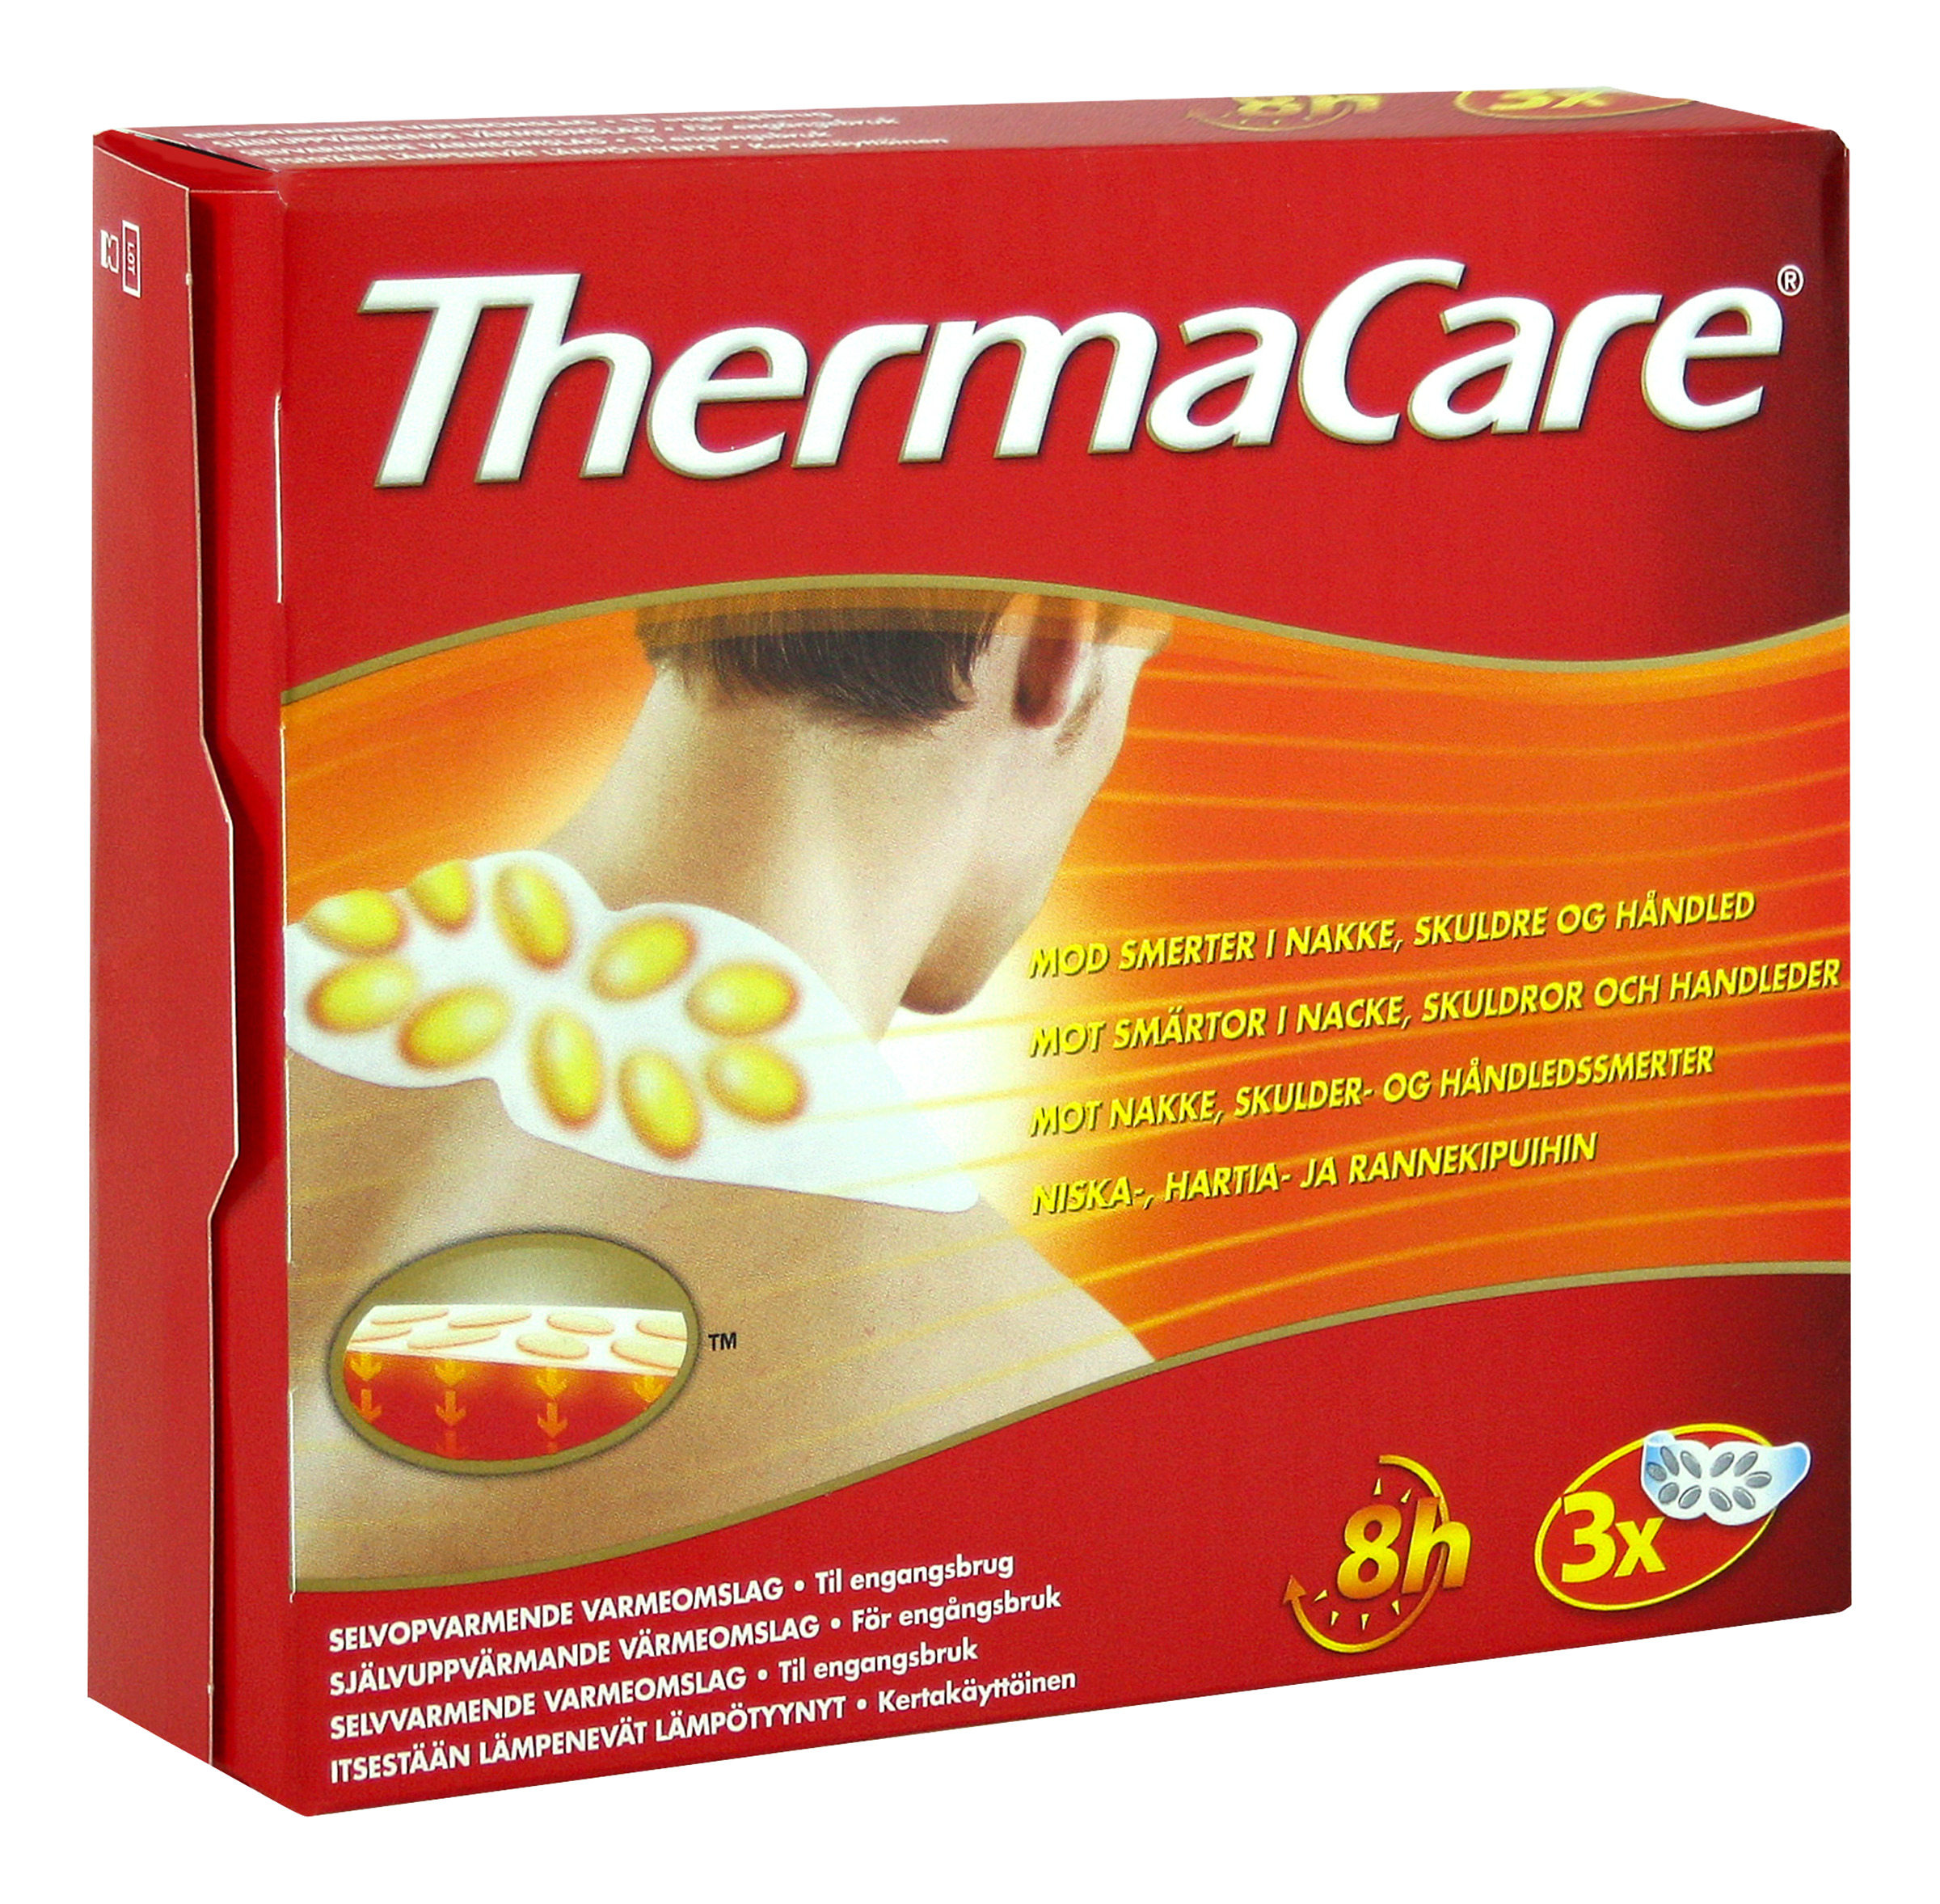 ThermaCare nacke & axel